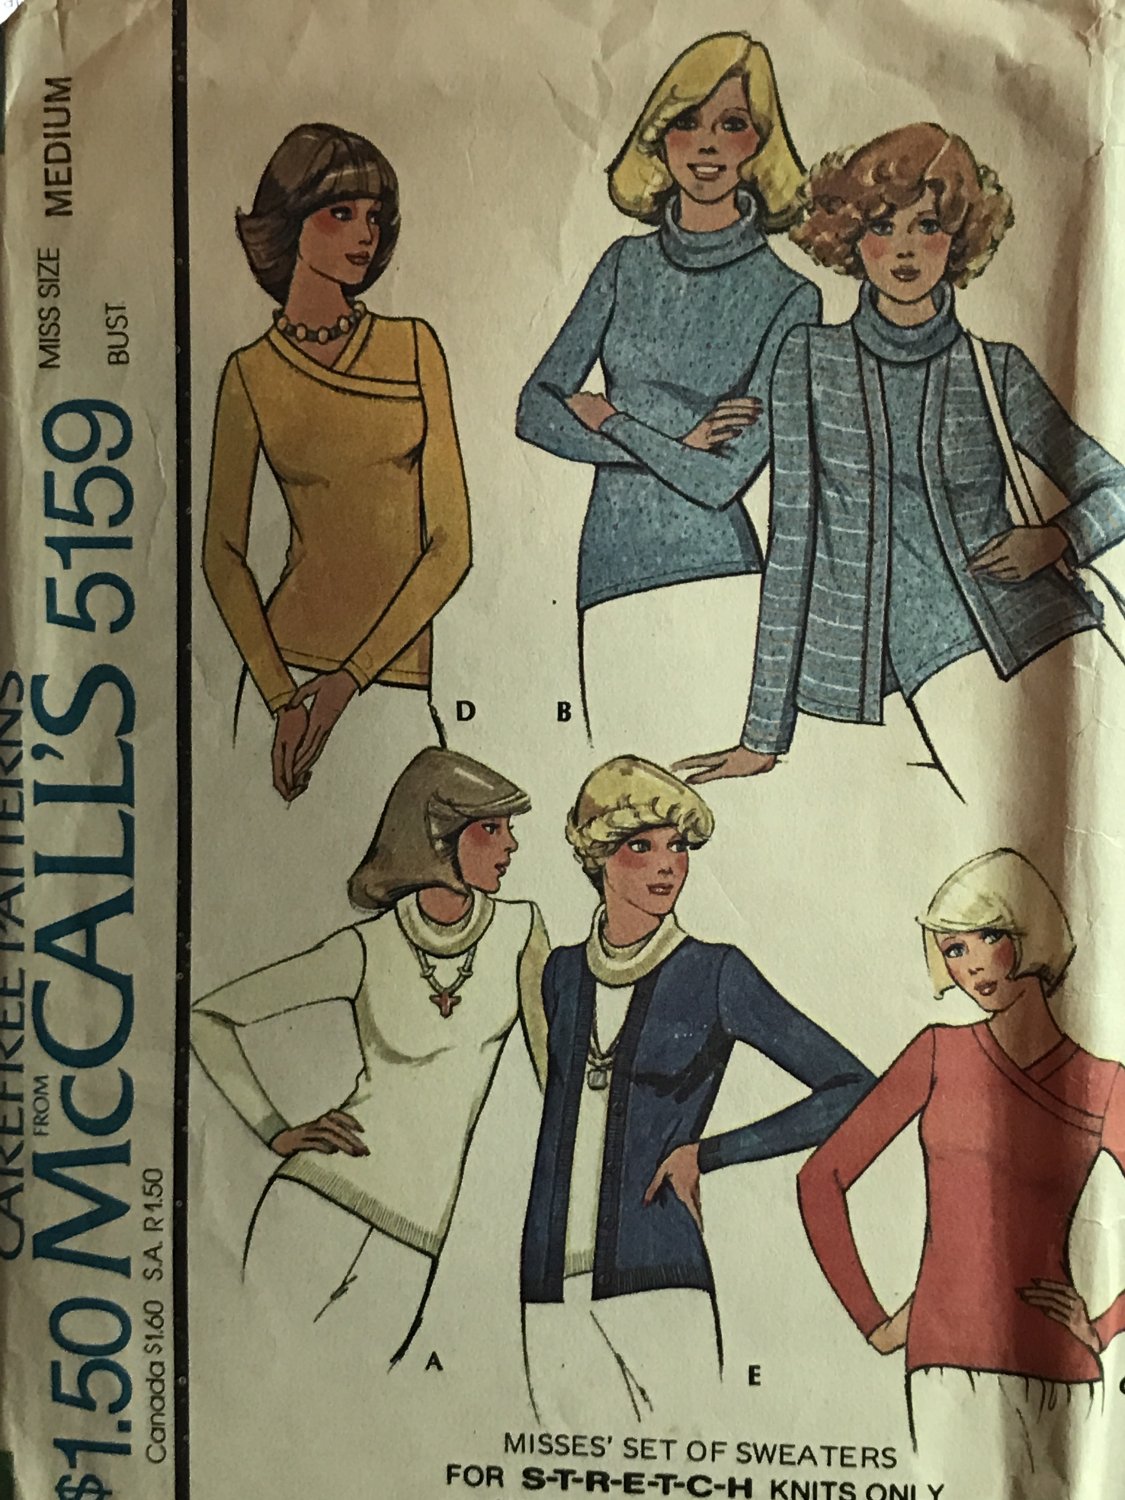 McCall's 5159 MISSES' SET OF SWEATERS FOR UNBONDED STRETCHABLE KNITS Sewing Pattern size 14 16